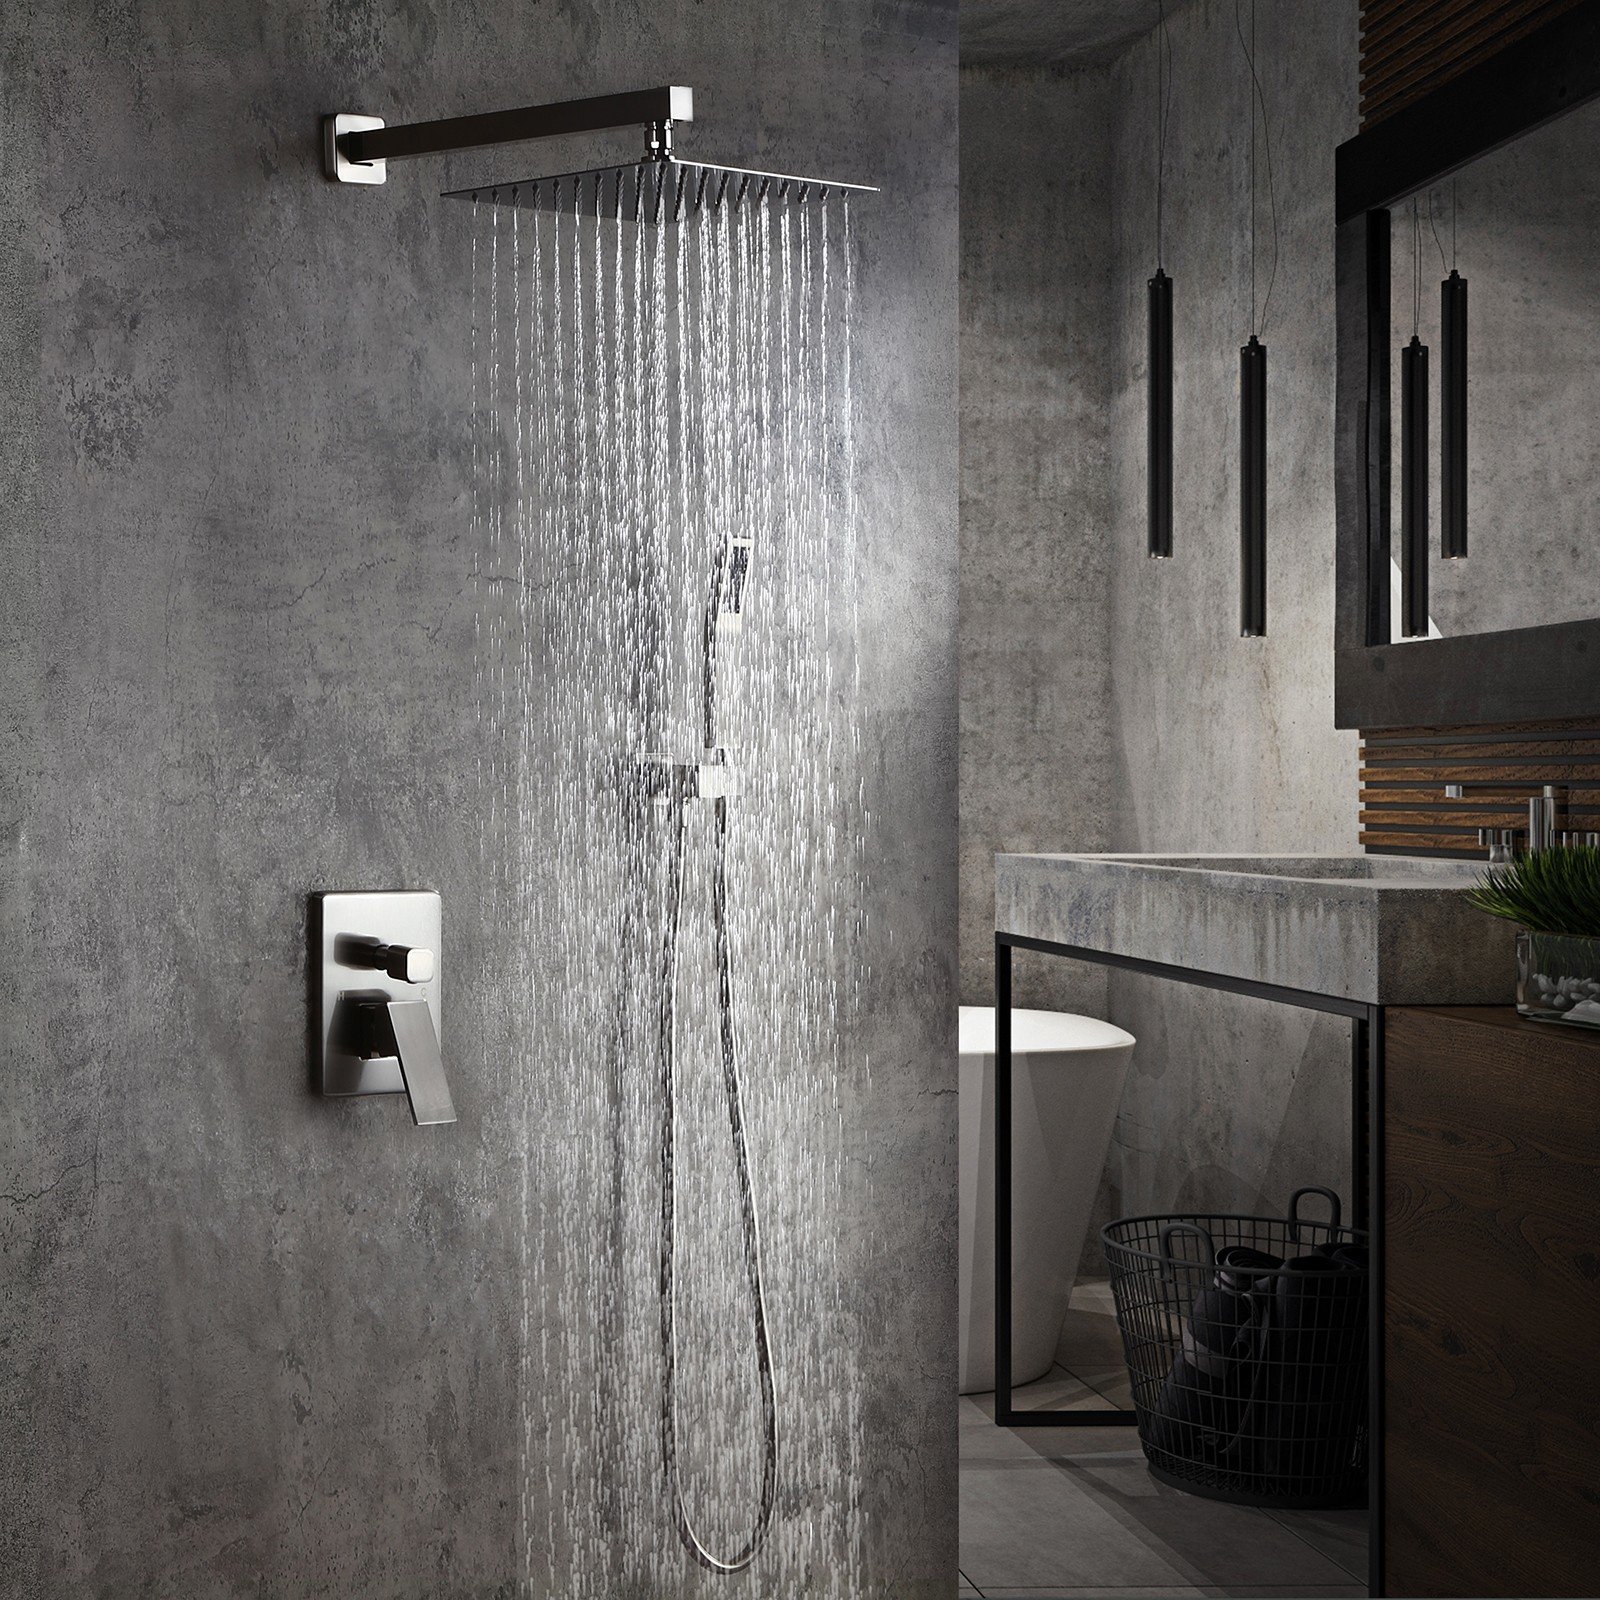 12" Wall Mounted Shower System with Handheld Shower and Pressure Balance Valve in a Modern Design